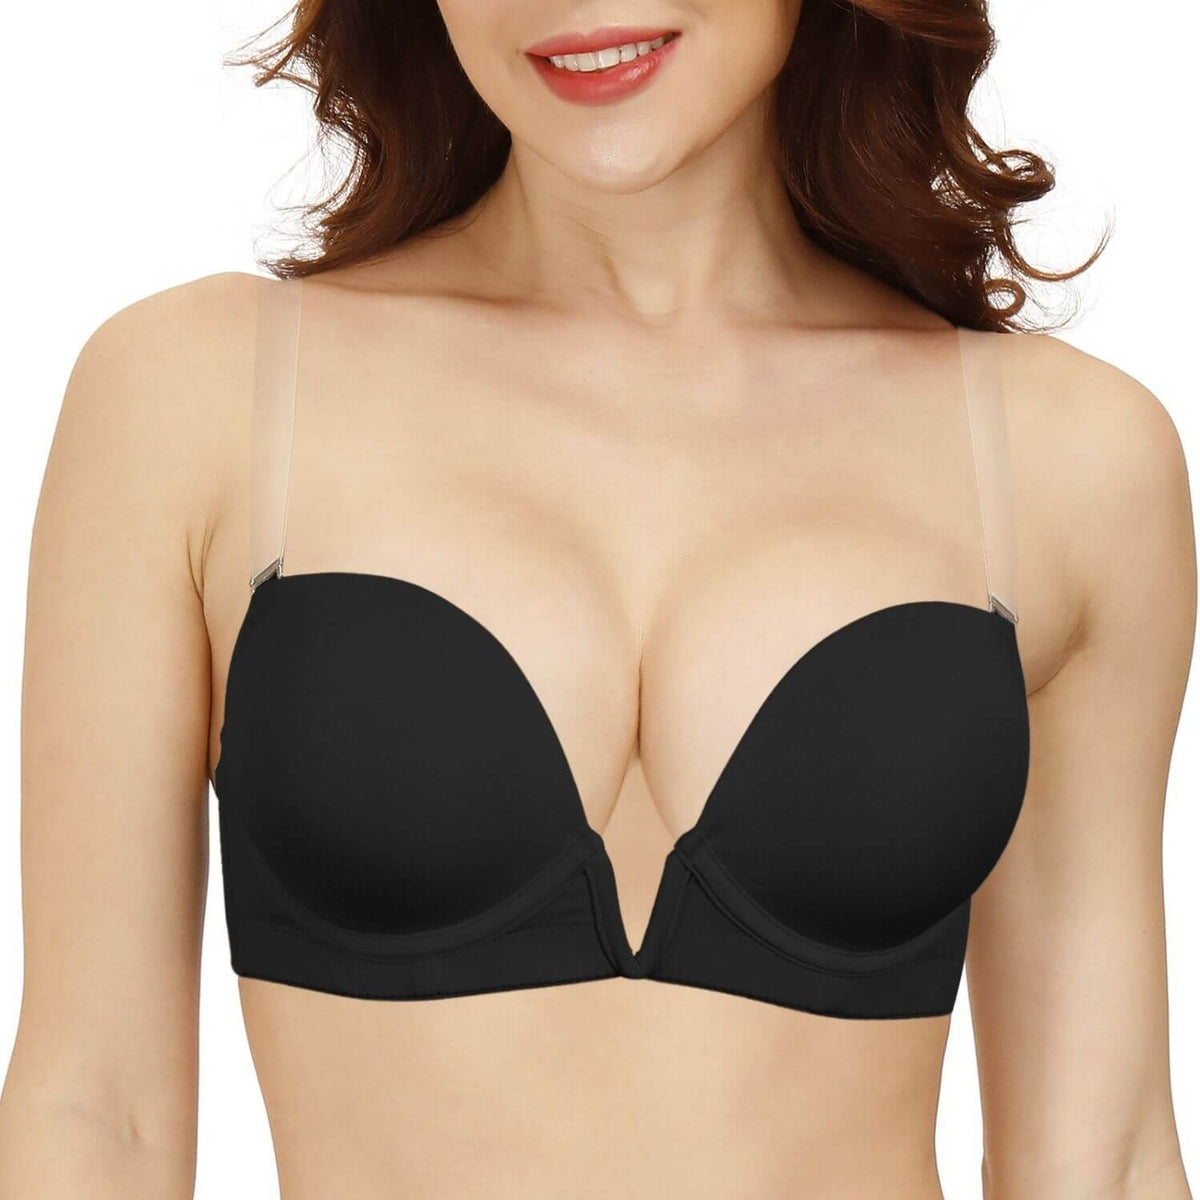 YANDW Front Closure Push Up Bra Strappy Thick Padded Cross Back Add 2 Cup  Plunge Seamless Underwire Bras Black,40D